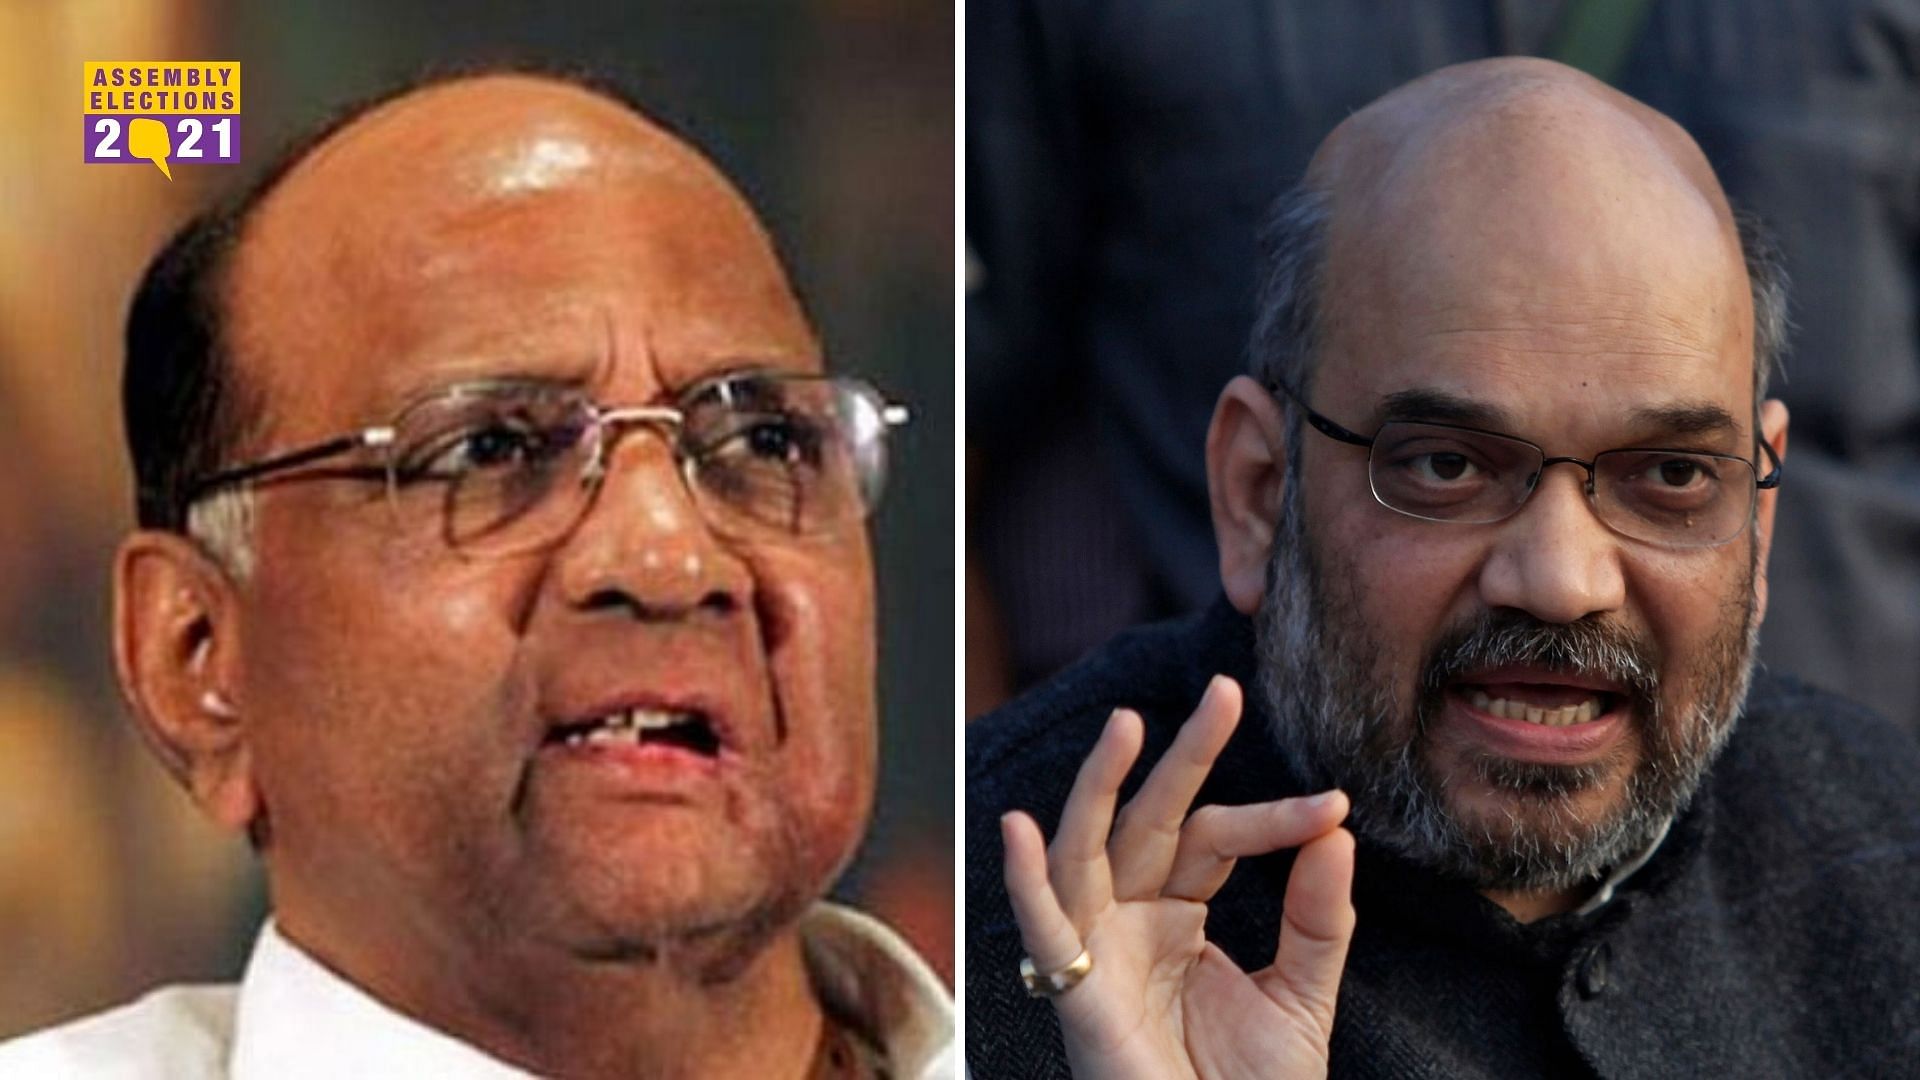 There were reports that Home Minister Amit Shah and NCP leader Sharad Pawar met in Ahmedabad amid ongoing power tussle in Maharashtra.